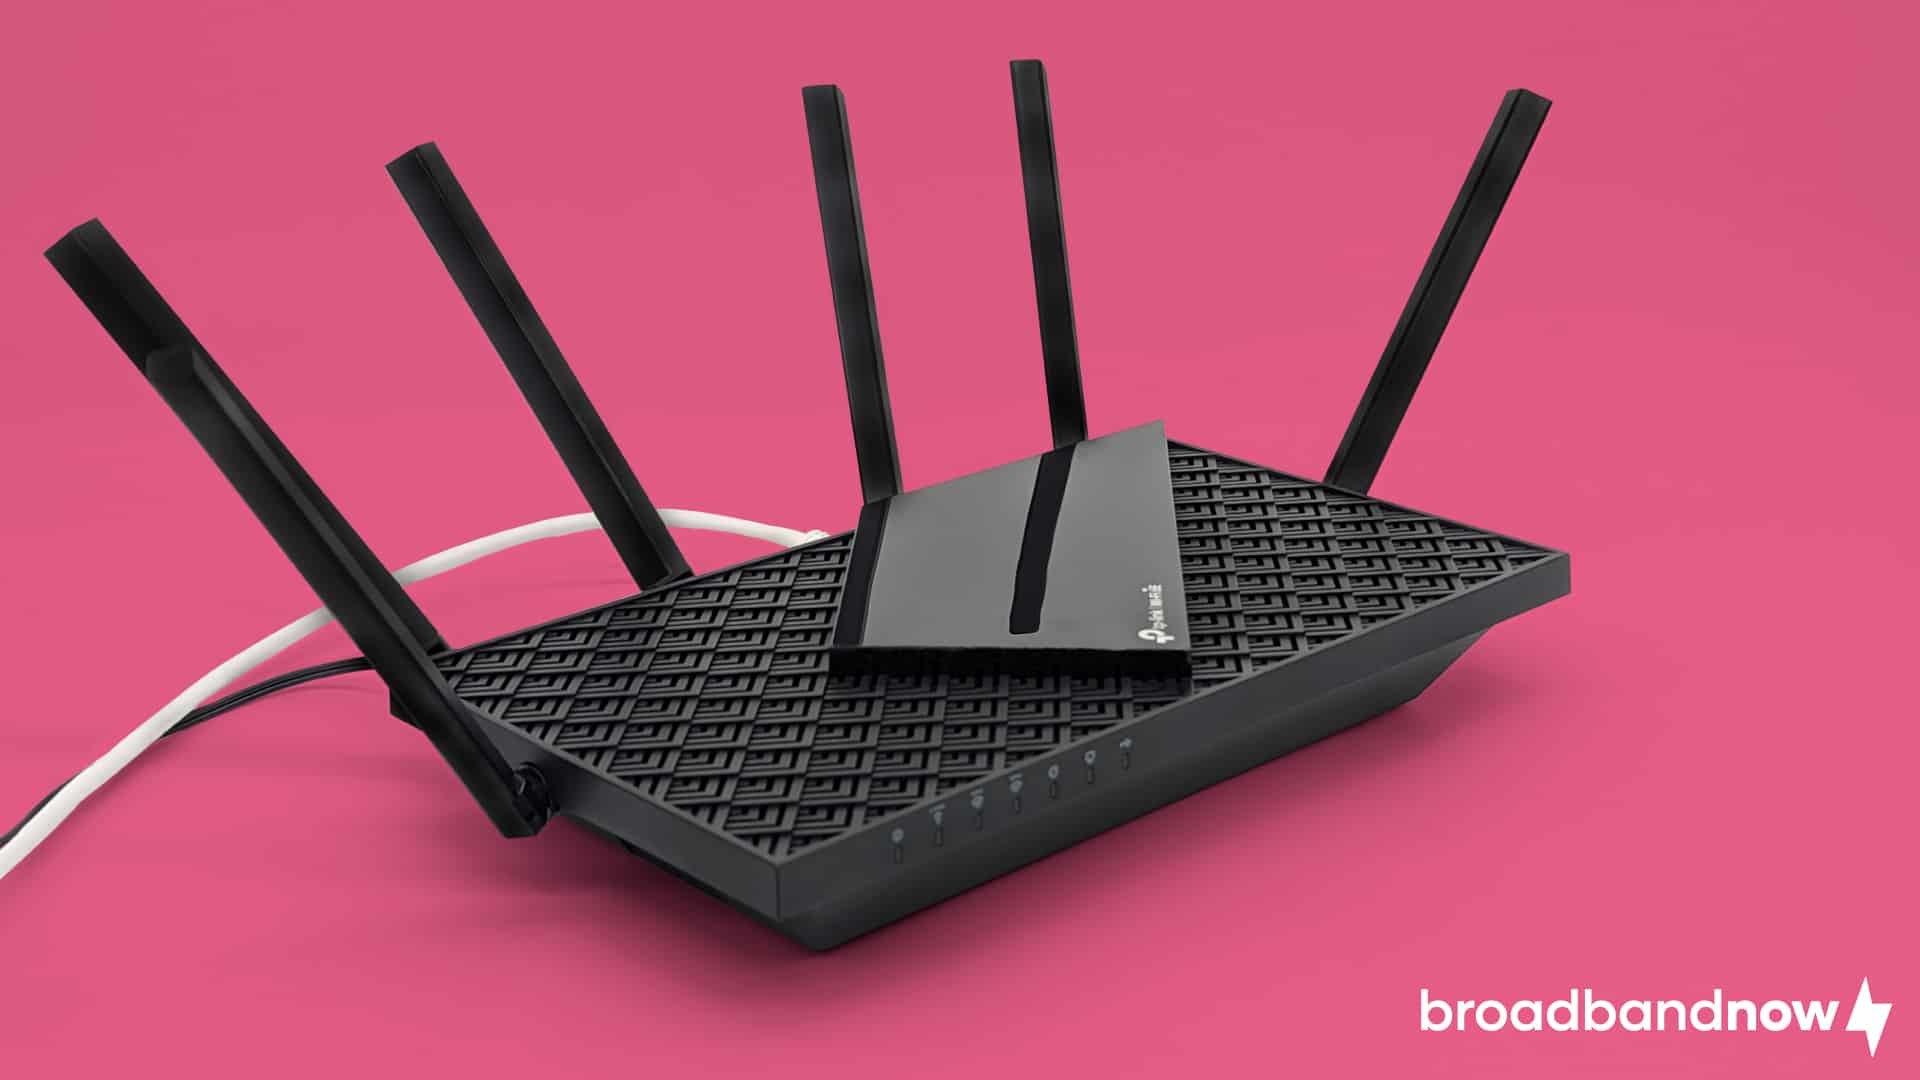 Photo of the TP-Link AXE75 Wi-Fi 6E router with cords plugged in